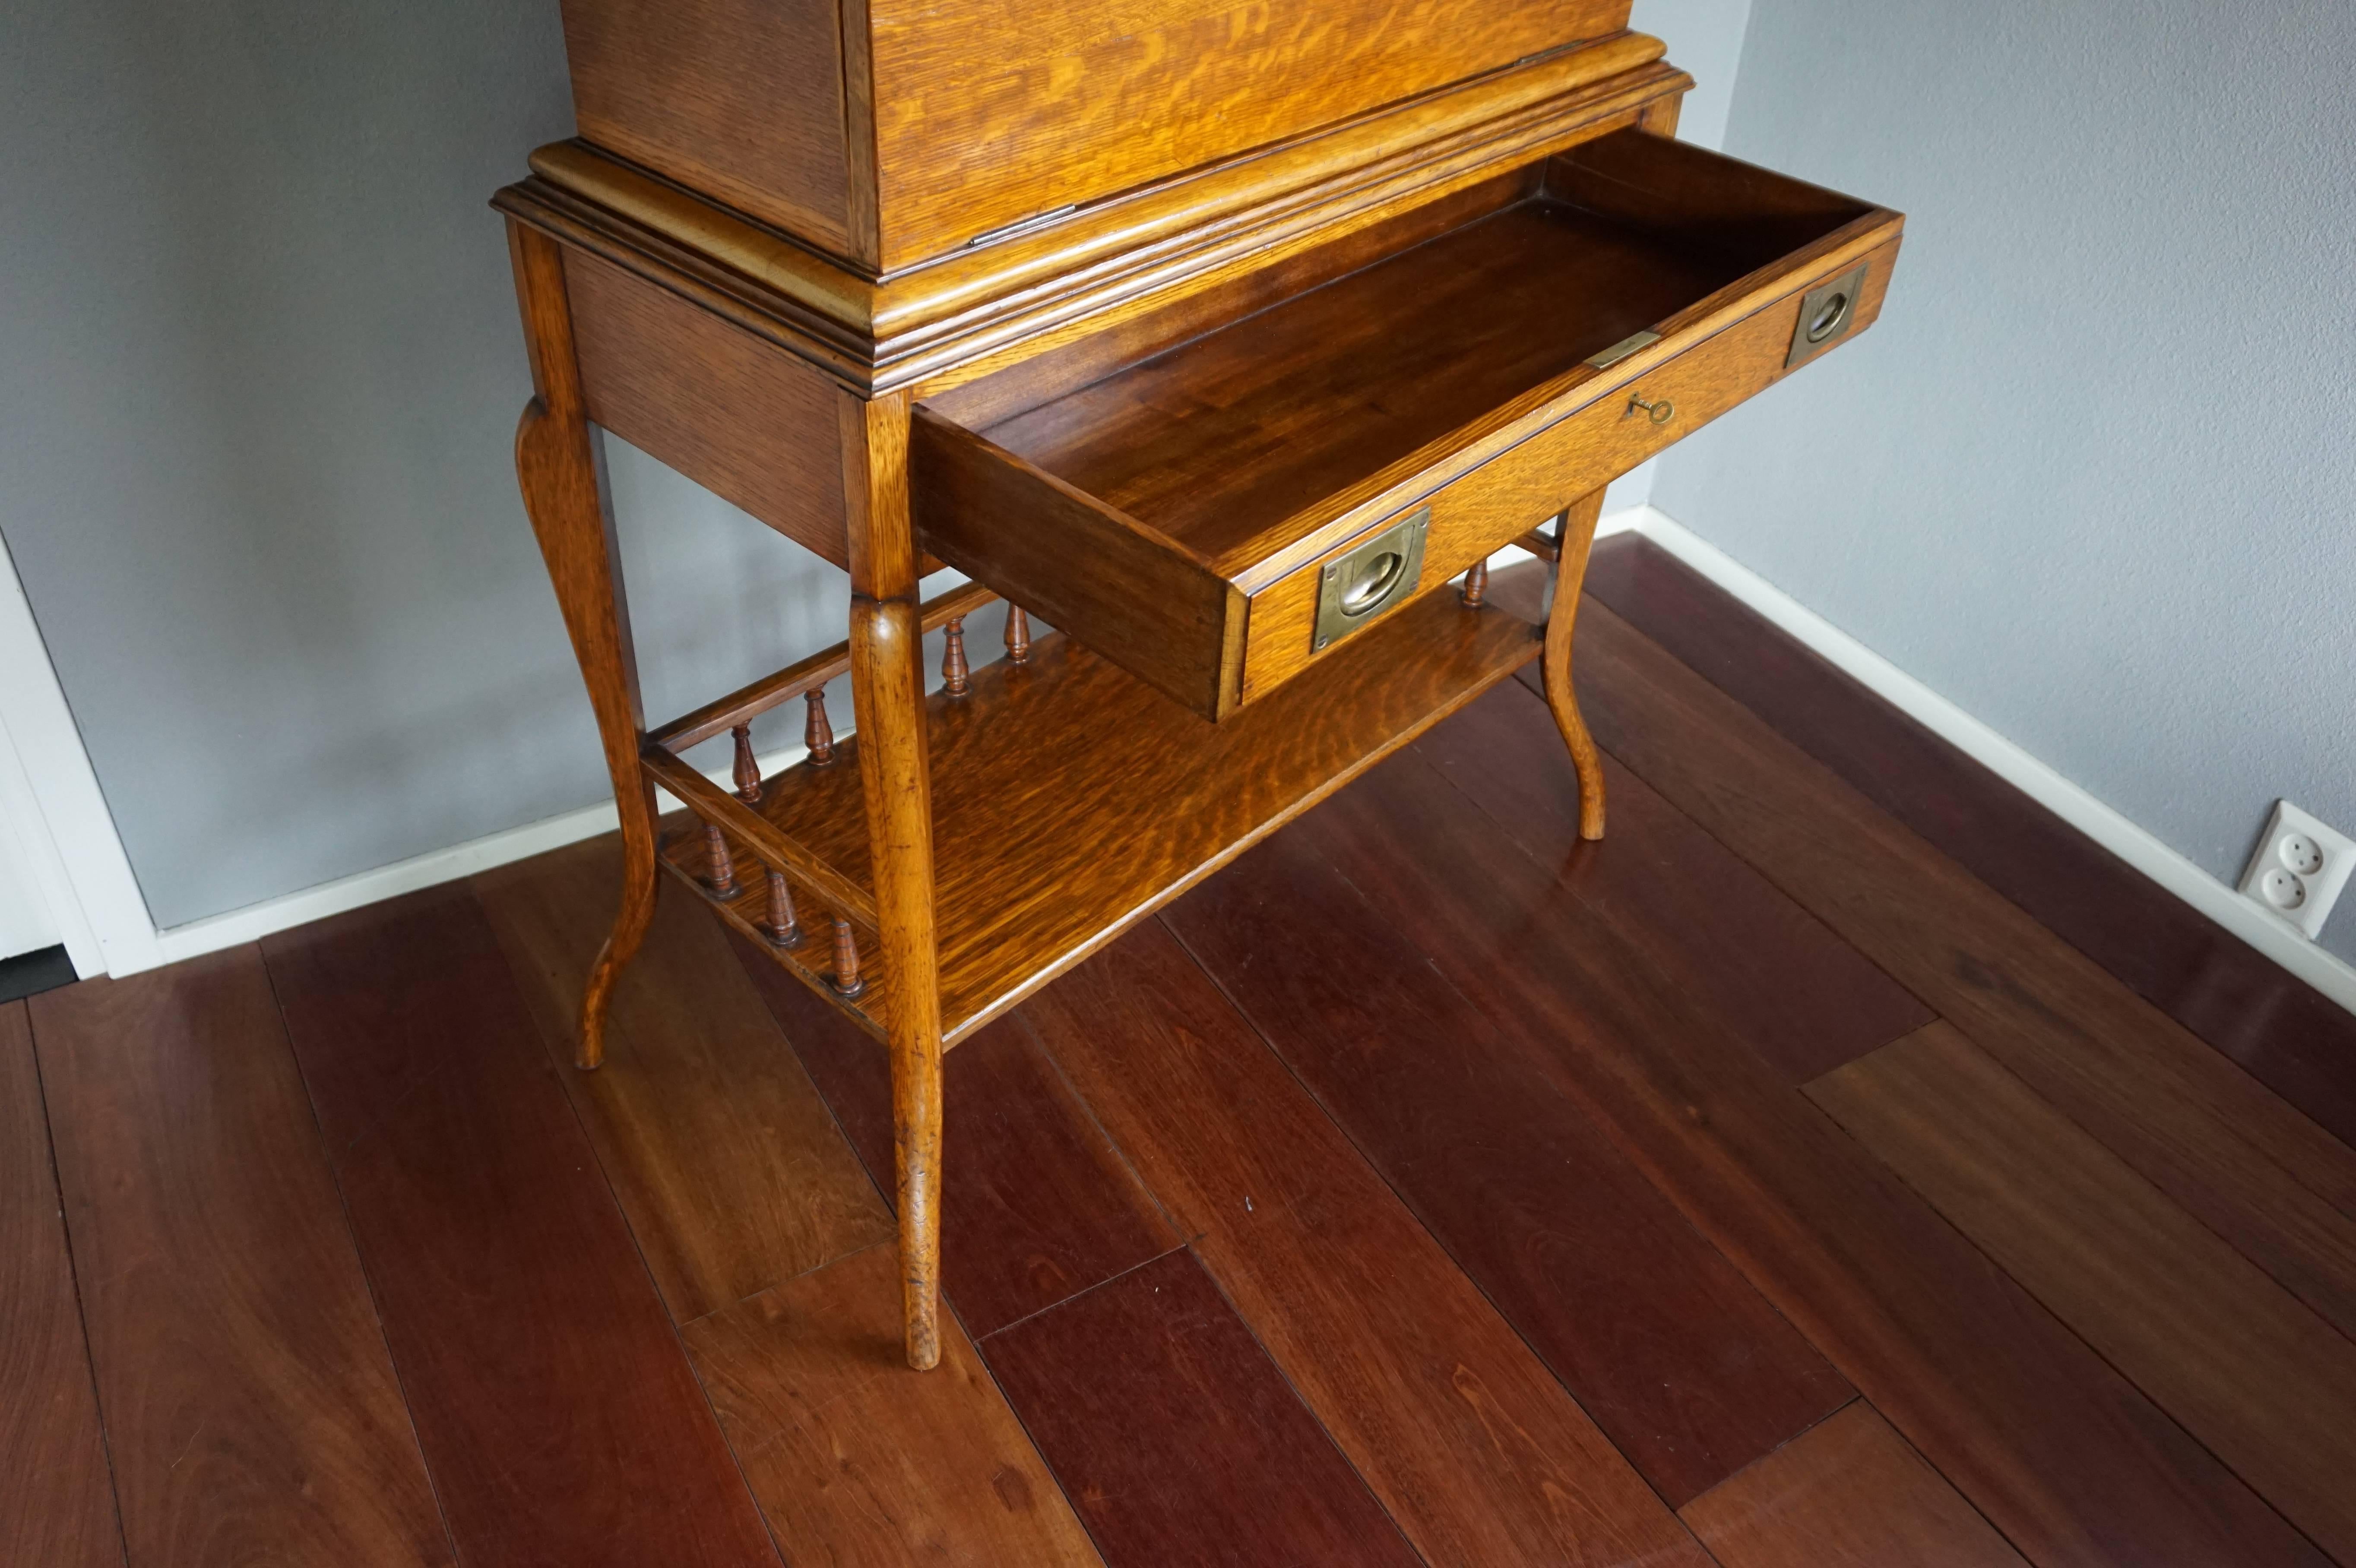 Stunning Late 19th Century Campaign or Travelers Desk Attr. to Thomas Potter For Sale 10